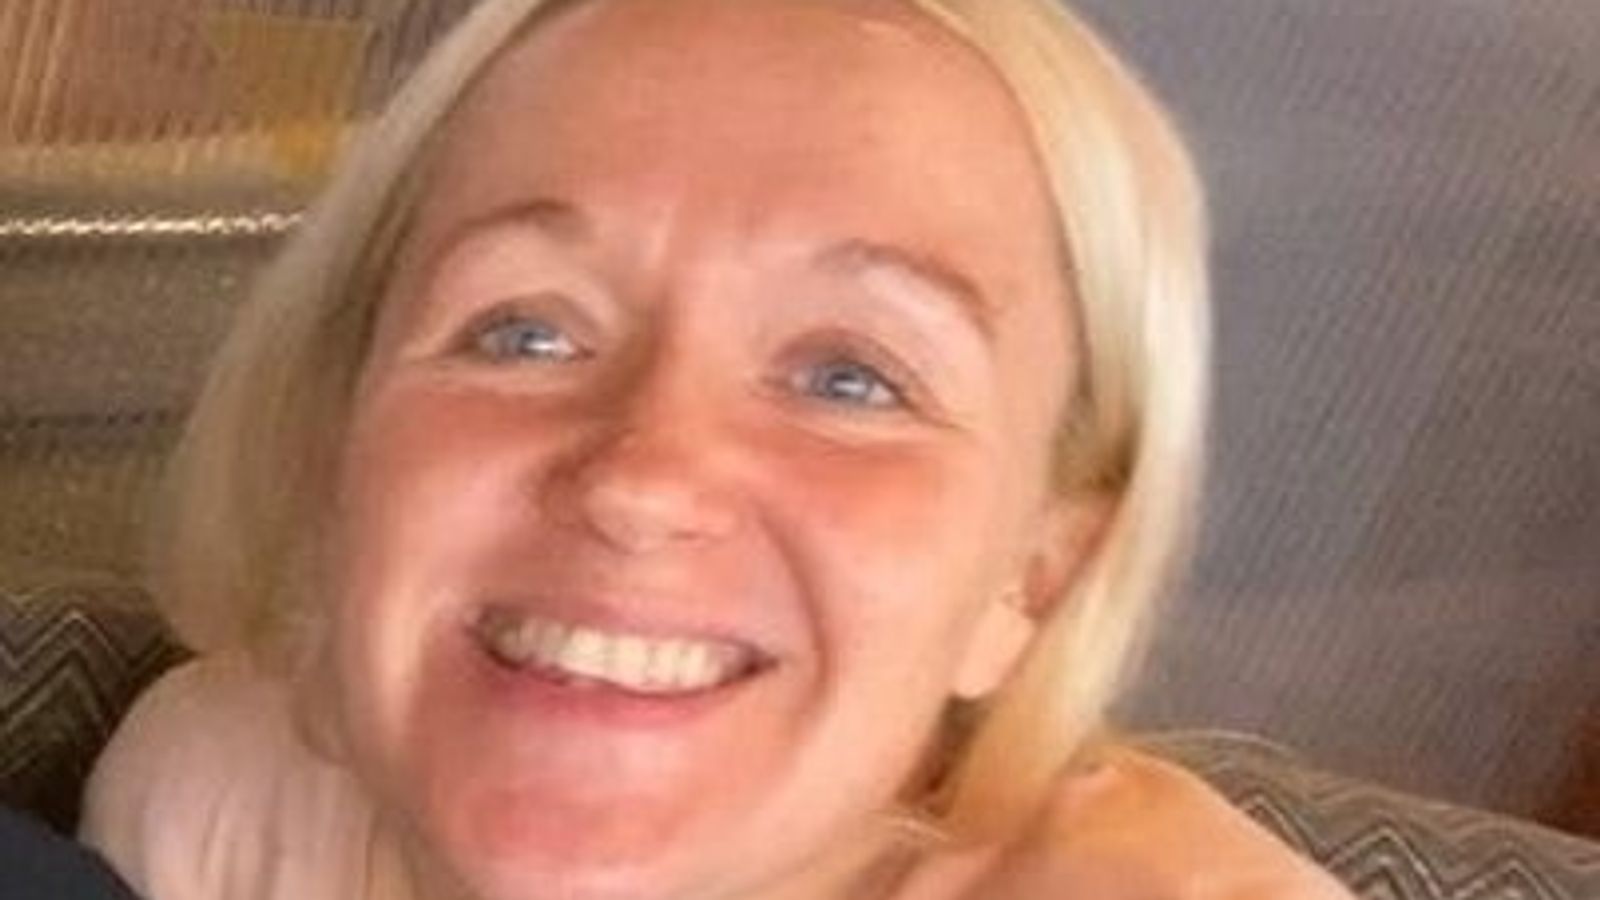 Man charged over death of woman at Glasgow house to appear in court